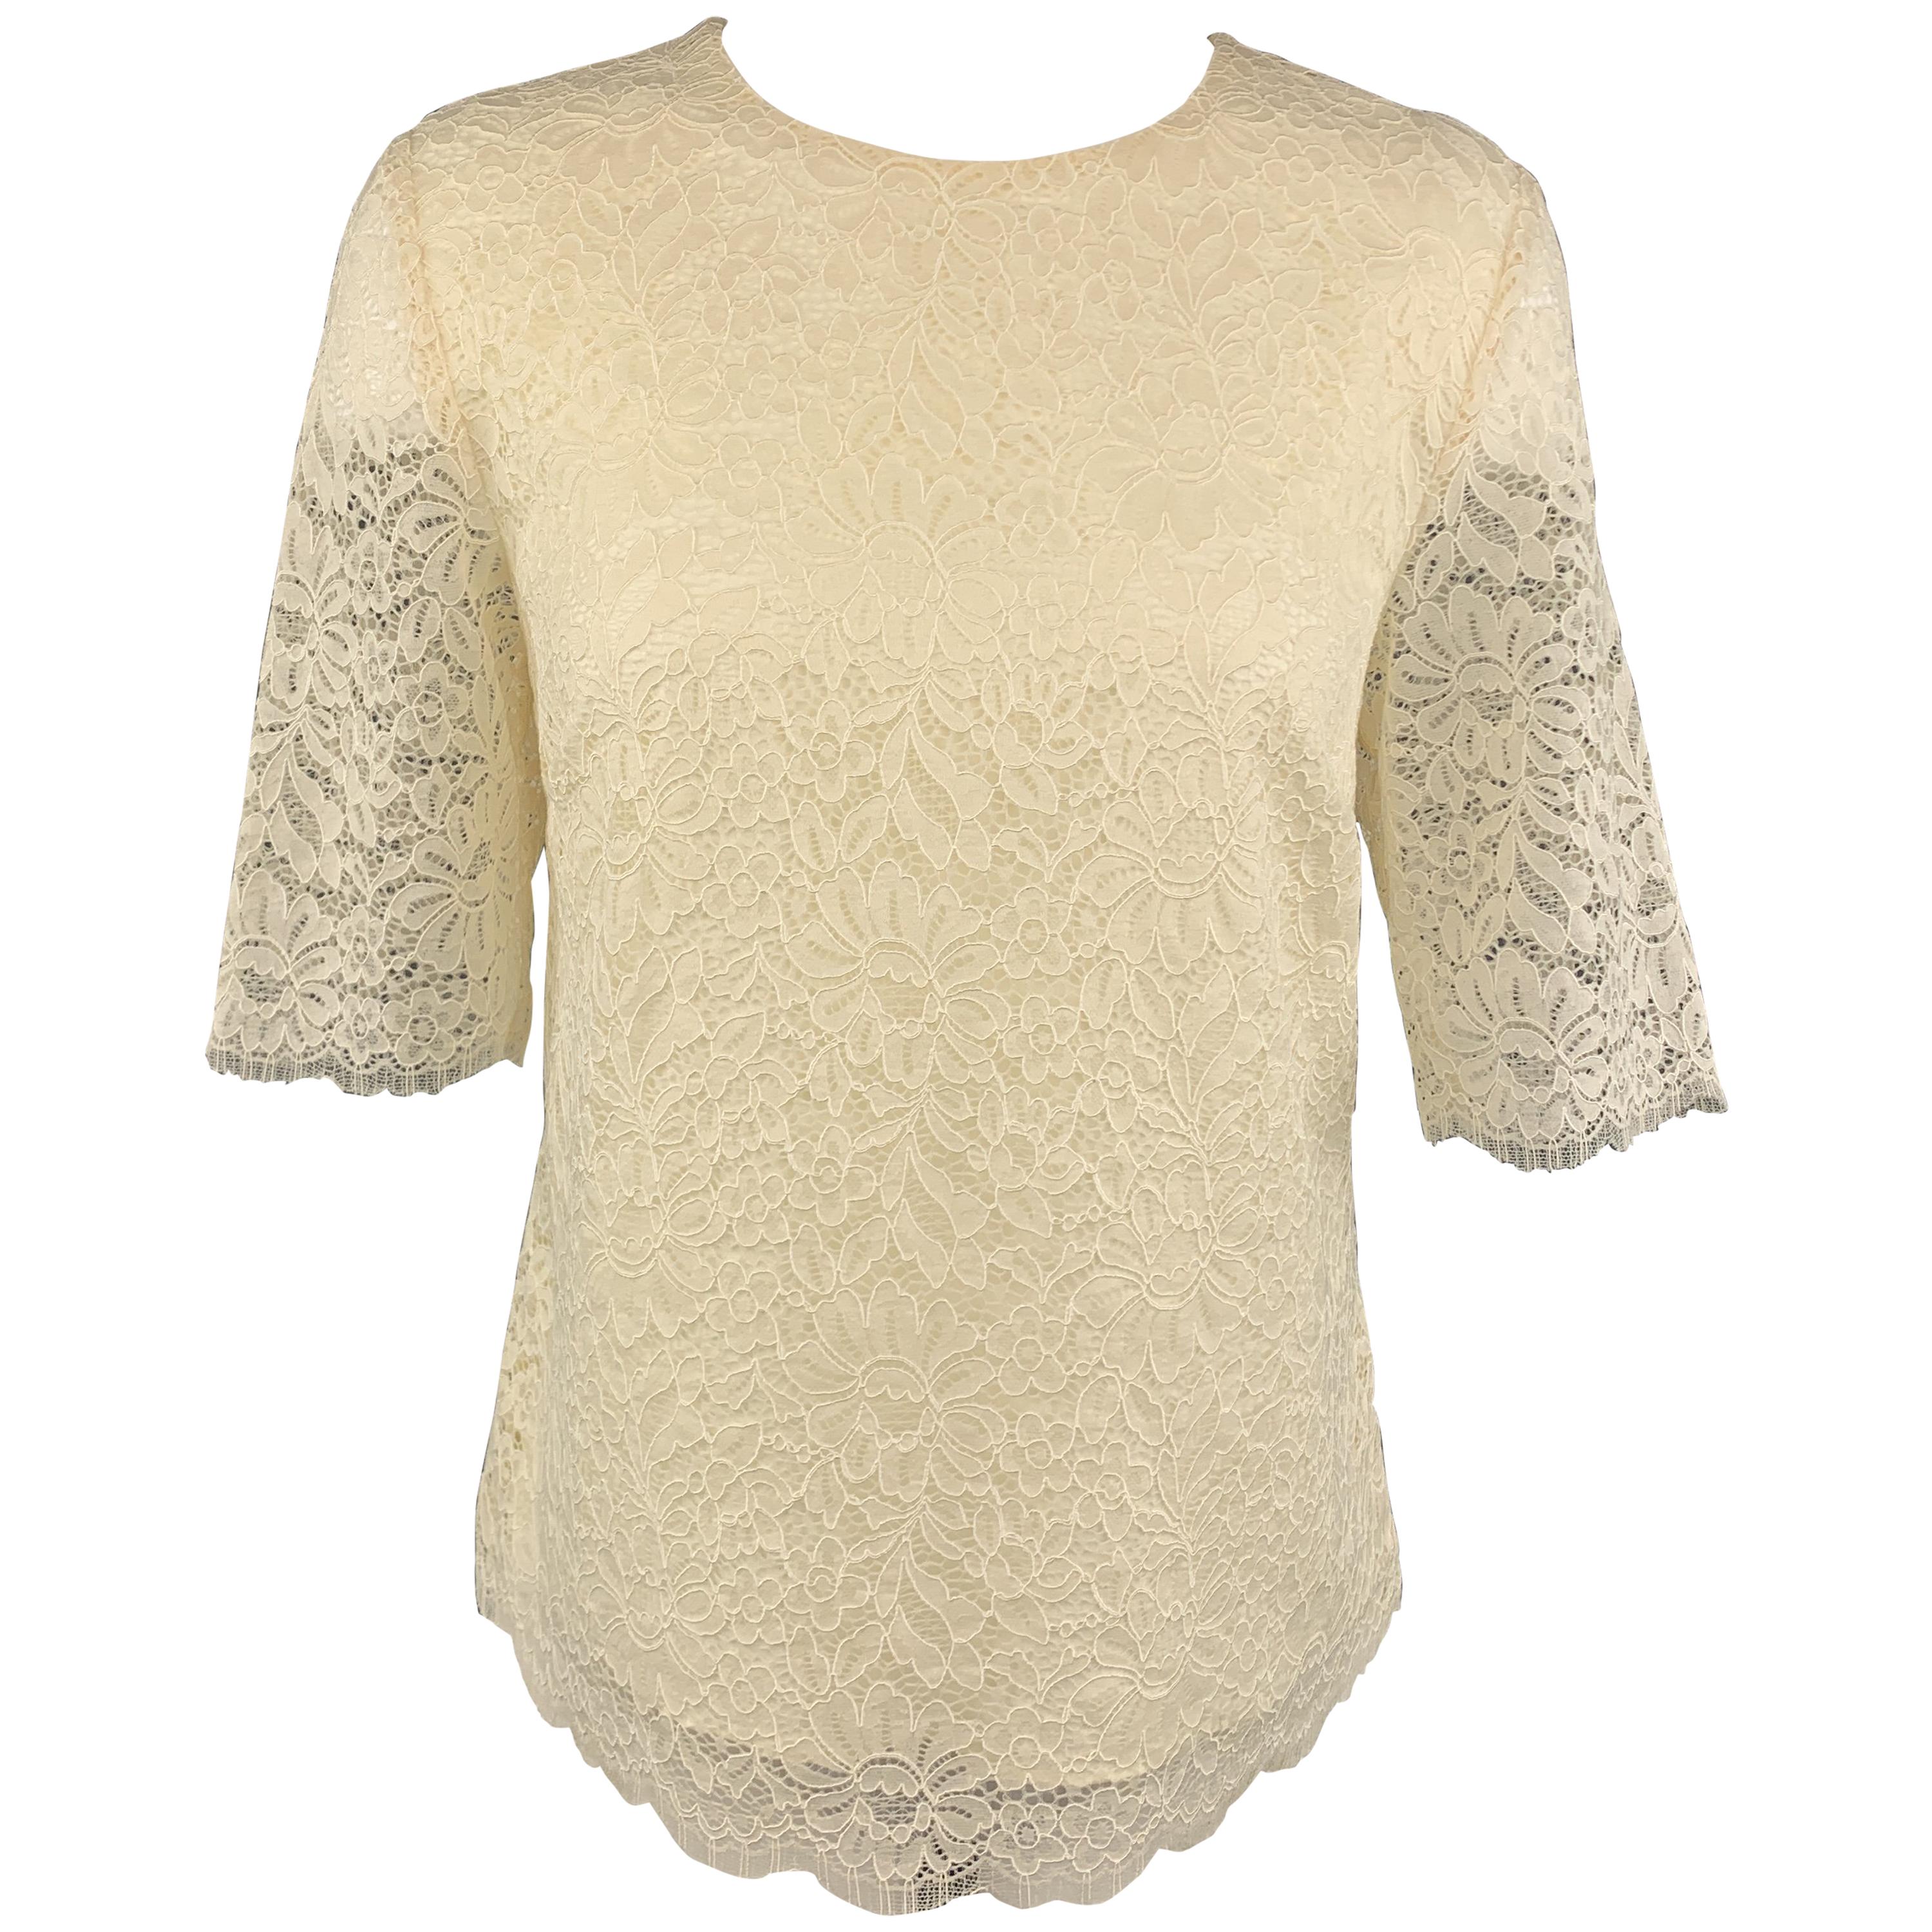 BARNEY'S NEW YORK Size 6 Cream Lace Short Sleeve Blouse For Sale at ...